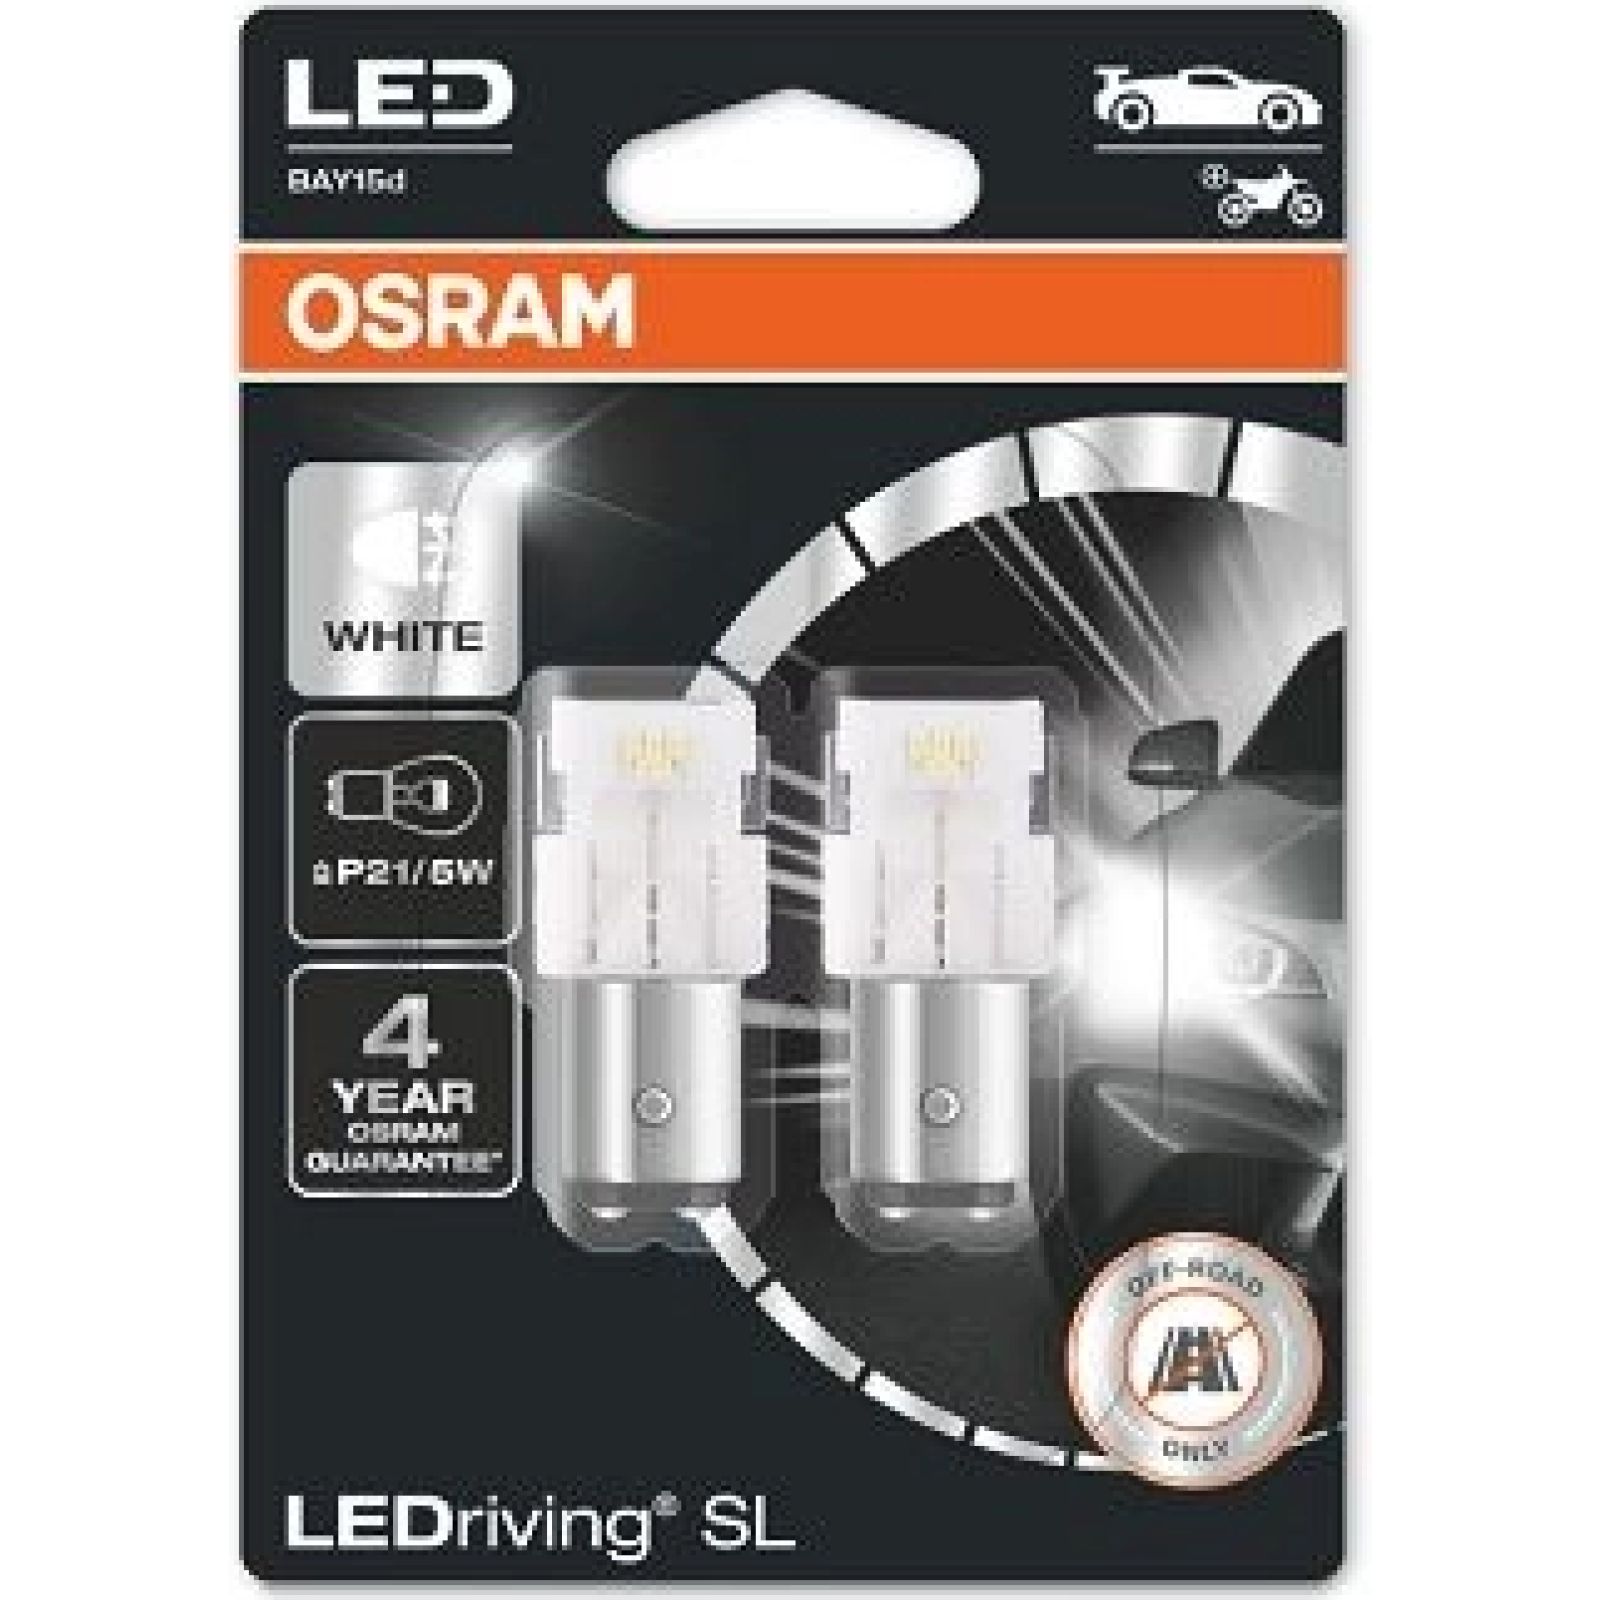 https://www.autoteile-store.at/img/product/p215w-osram-led-white-6000k-12v-ledriving-r-sl-7528dwp-02b-200267/4f55d3676a6710c24b8c4701c7e6c42f_1600.jpg